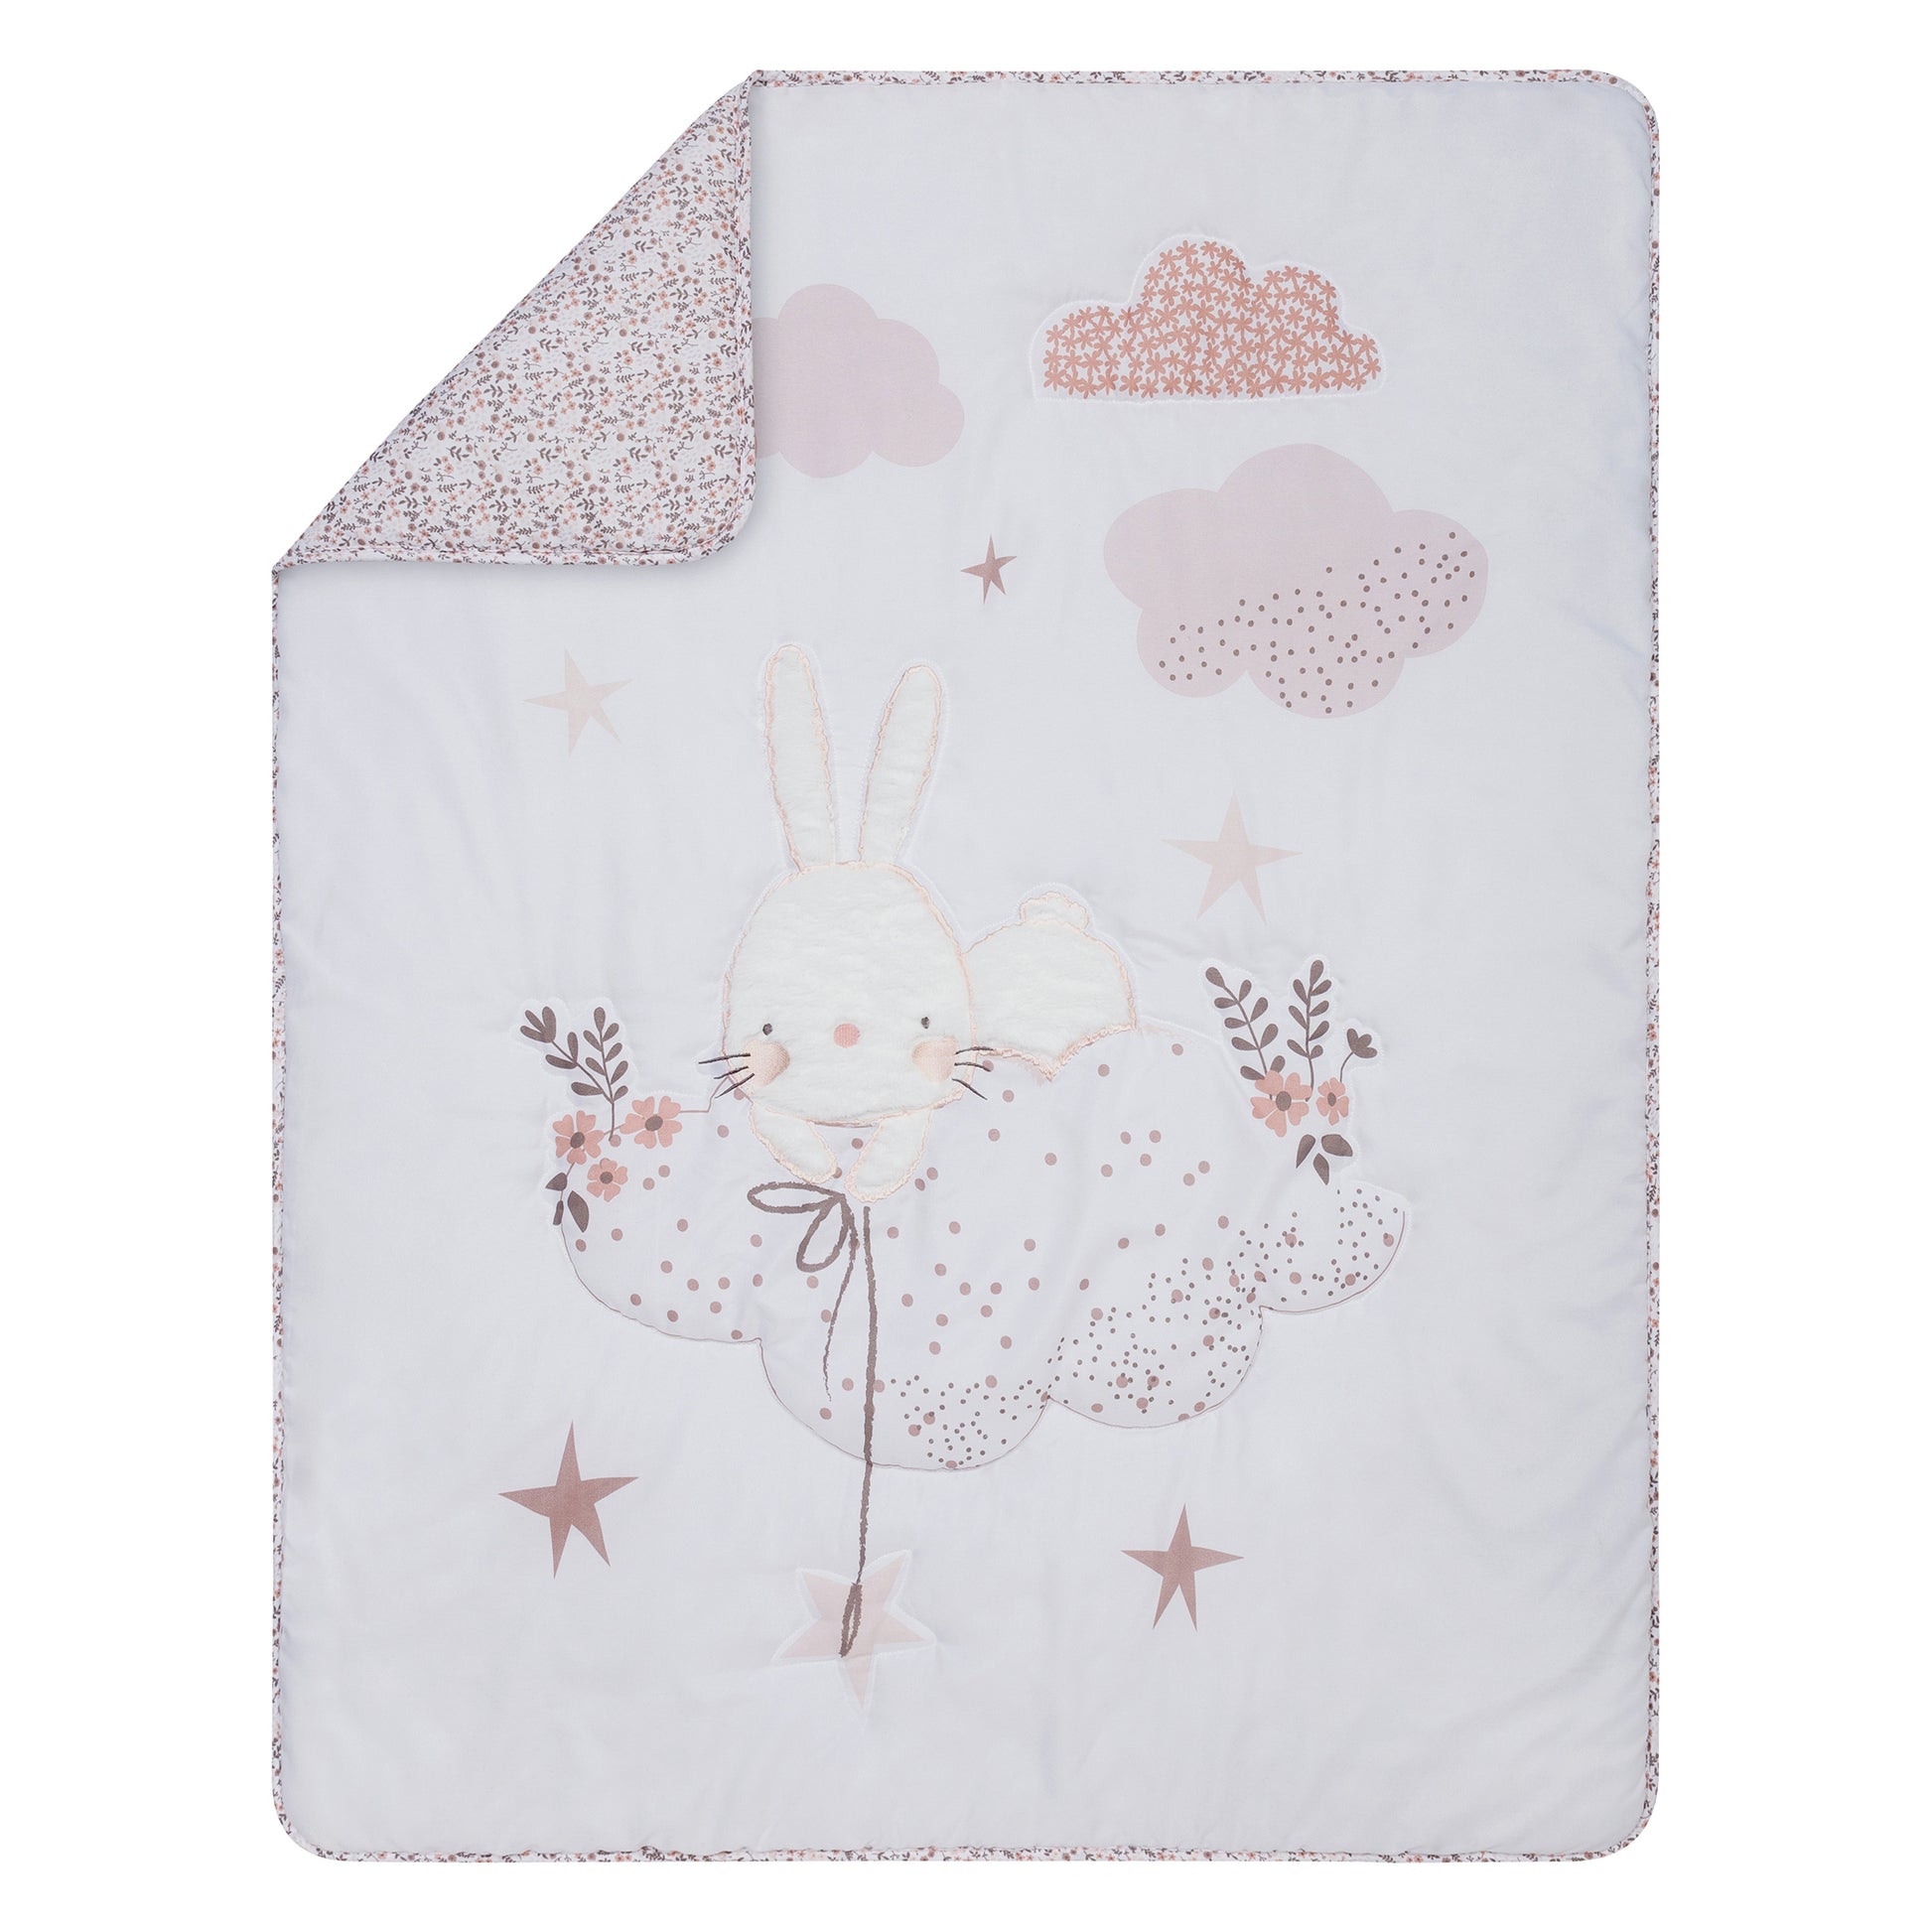 Nursery Crib Quilt Features an adorable bunny rests among the clouds and stars which are accented by floral and dot prints in a soft color palette of soft pinks and gray on a clean white background. 